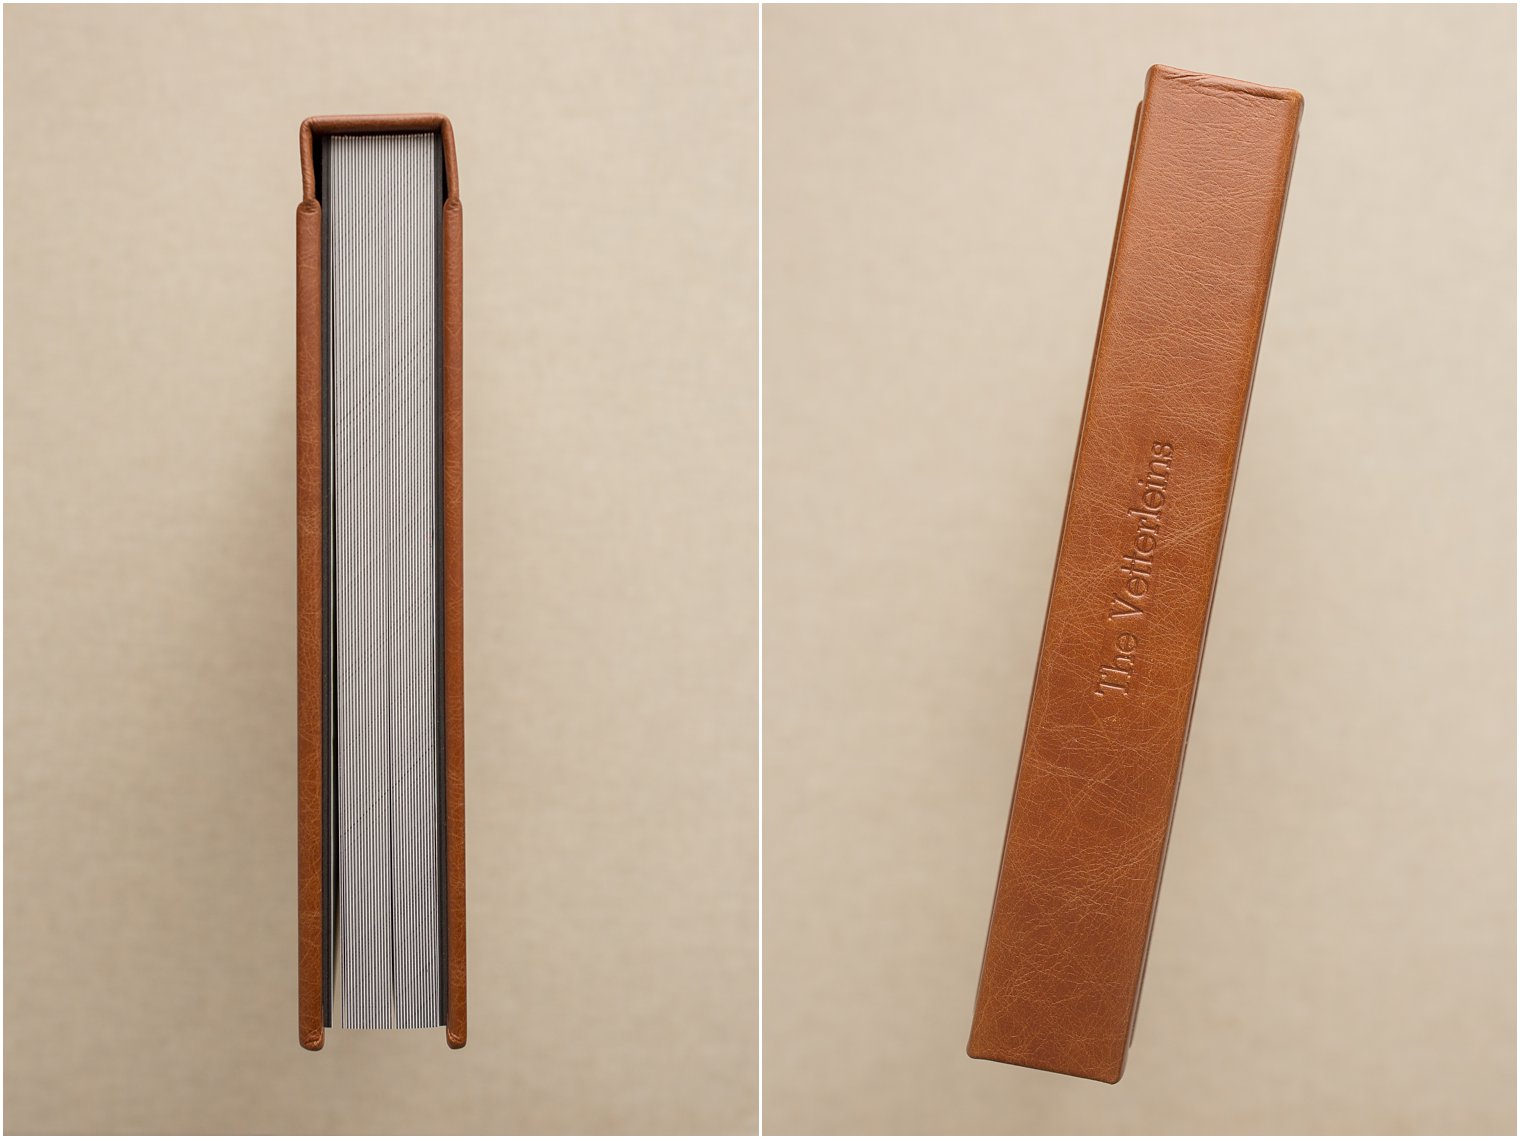 Photo of a brown leather wedding album